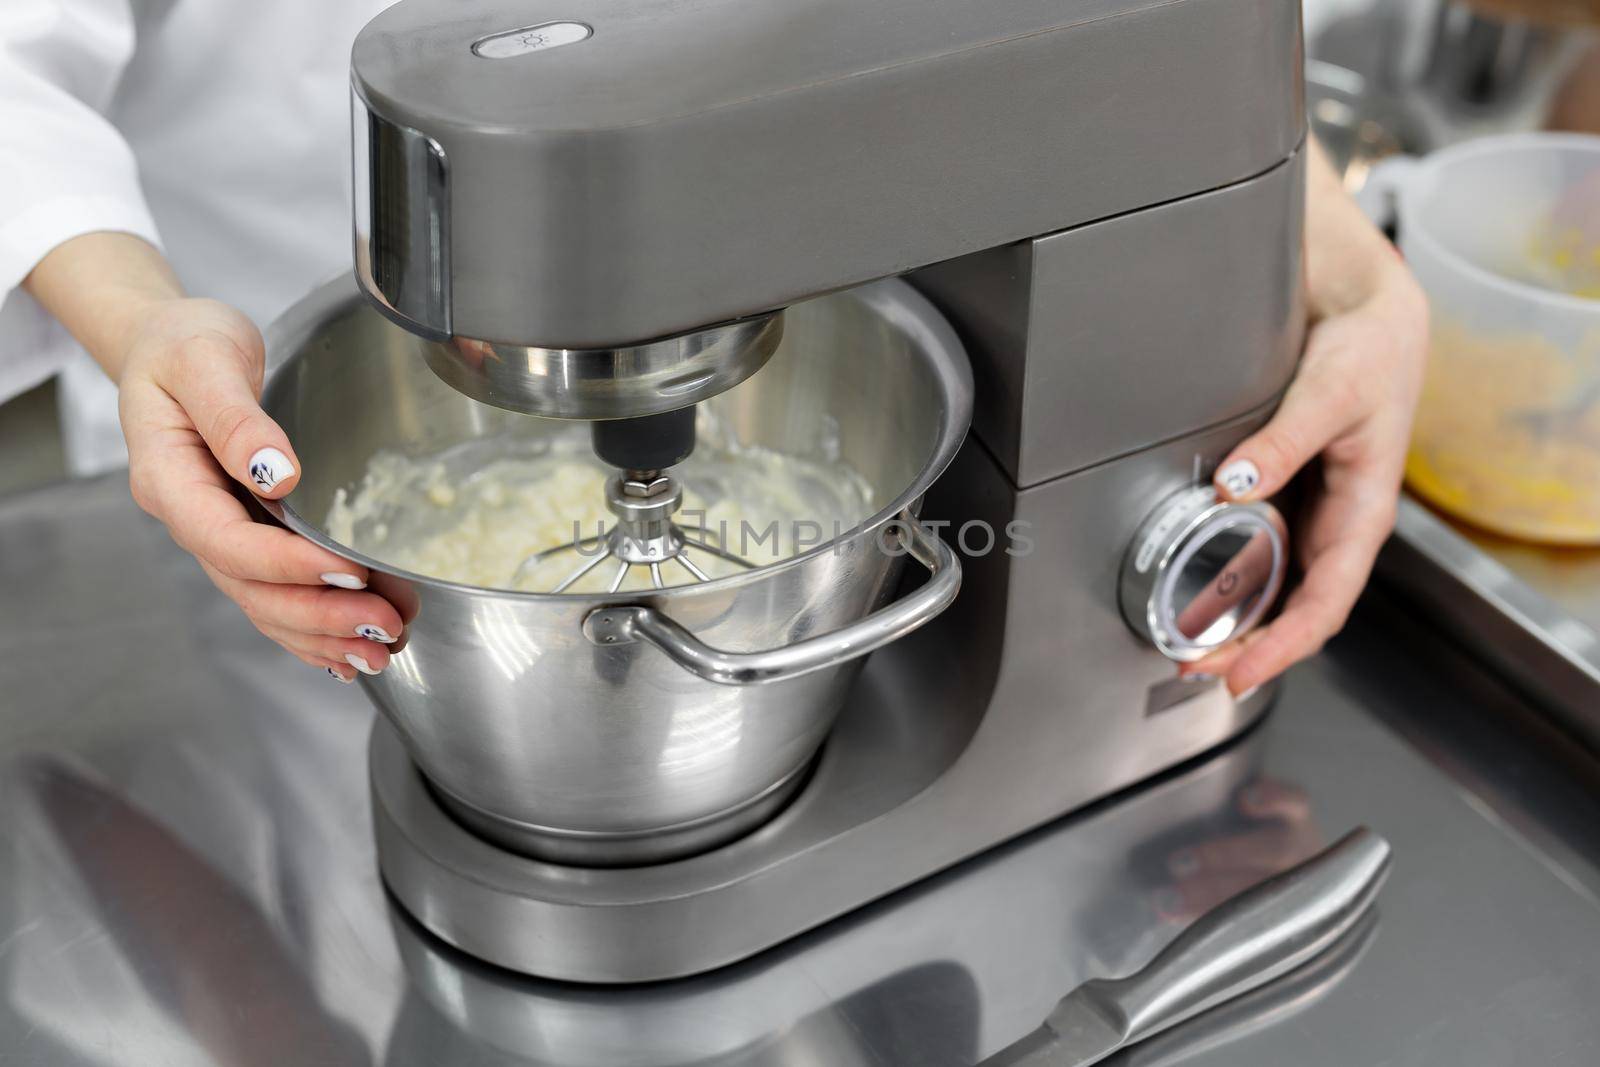 Pastry chef in the kitchen of the restaurant includes a mixer, food processor by StudioPeace